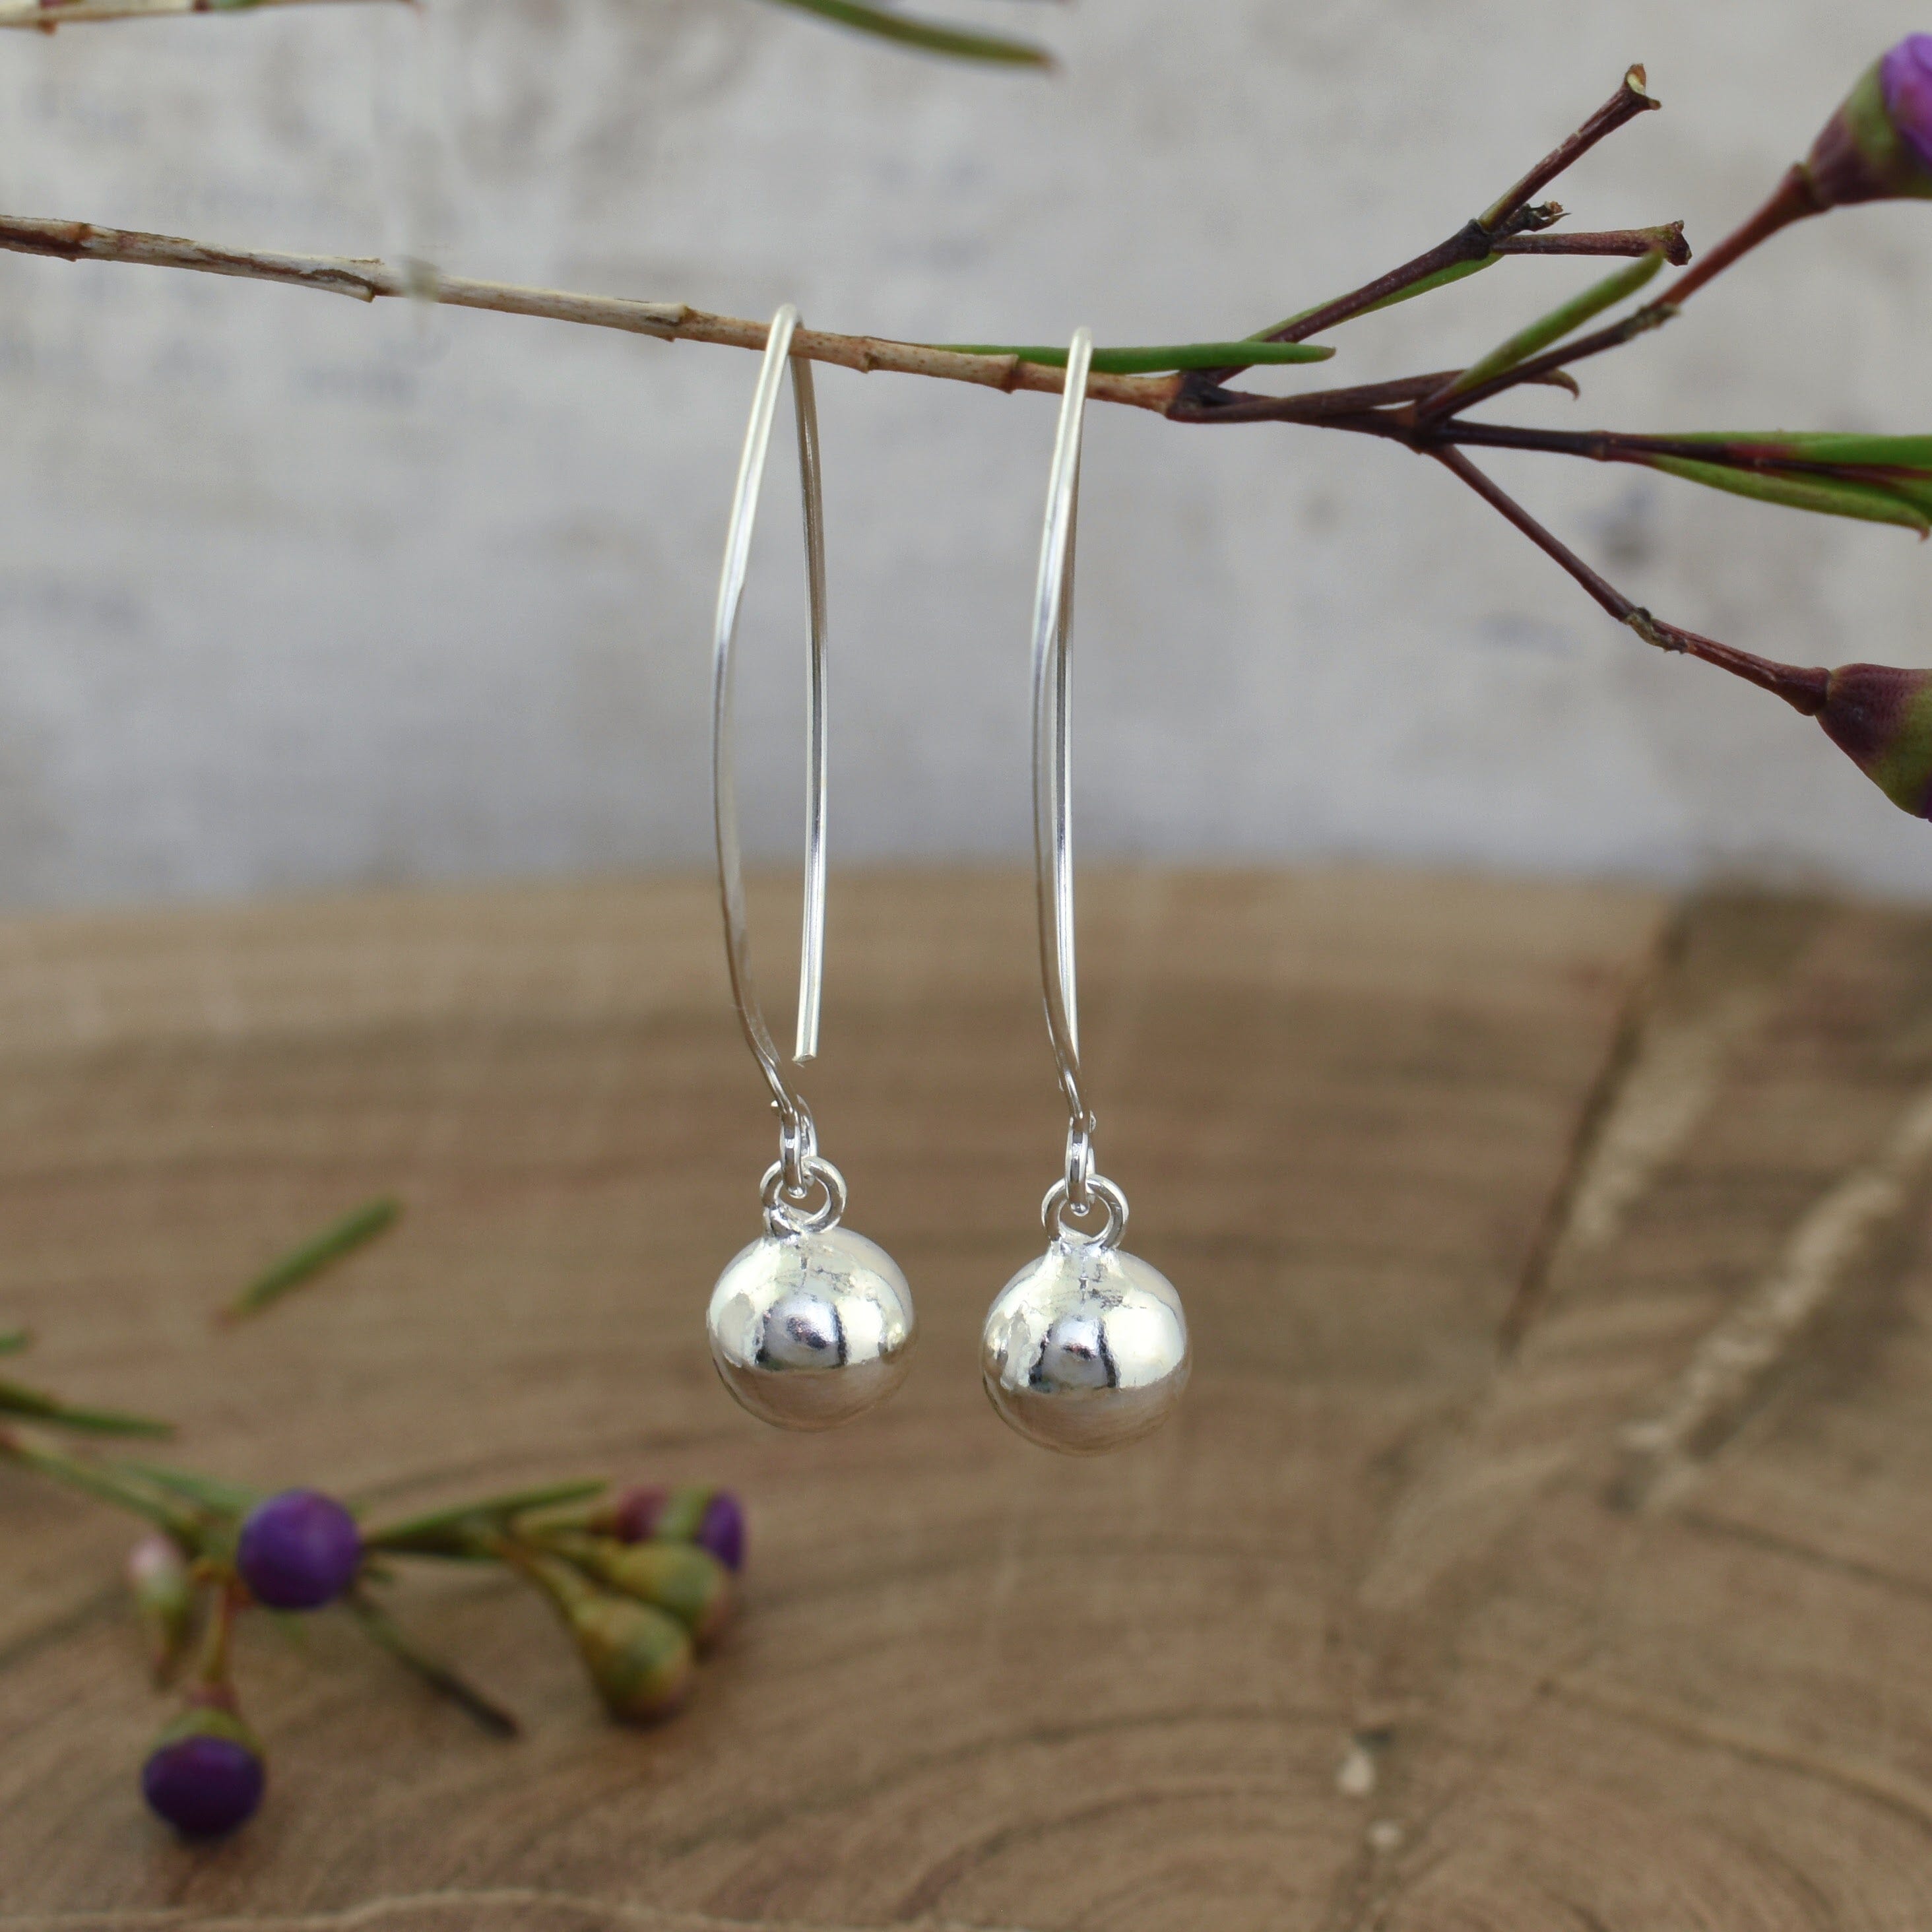 .925 sterling silver earrings with dangling sterling silver ball